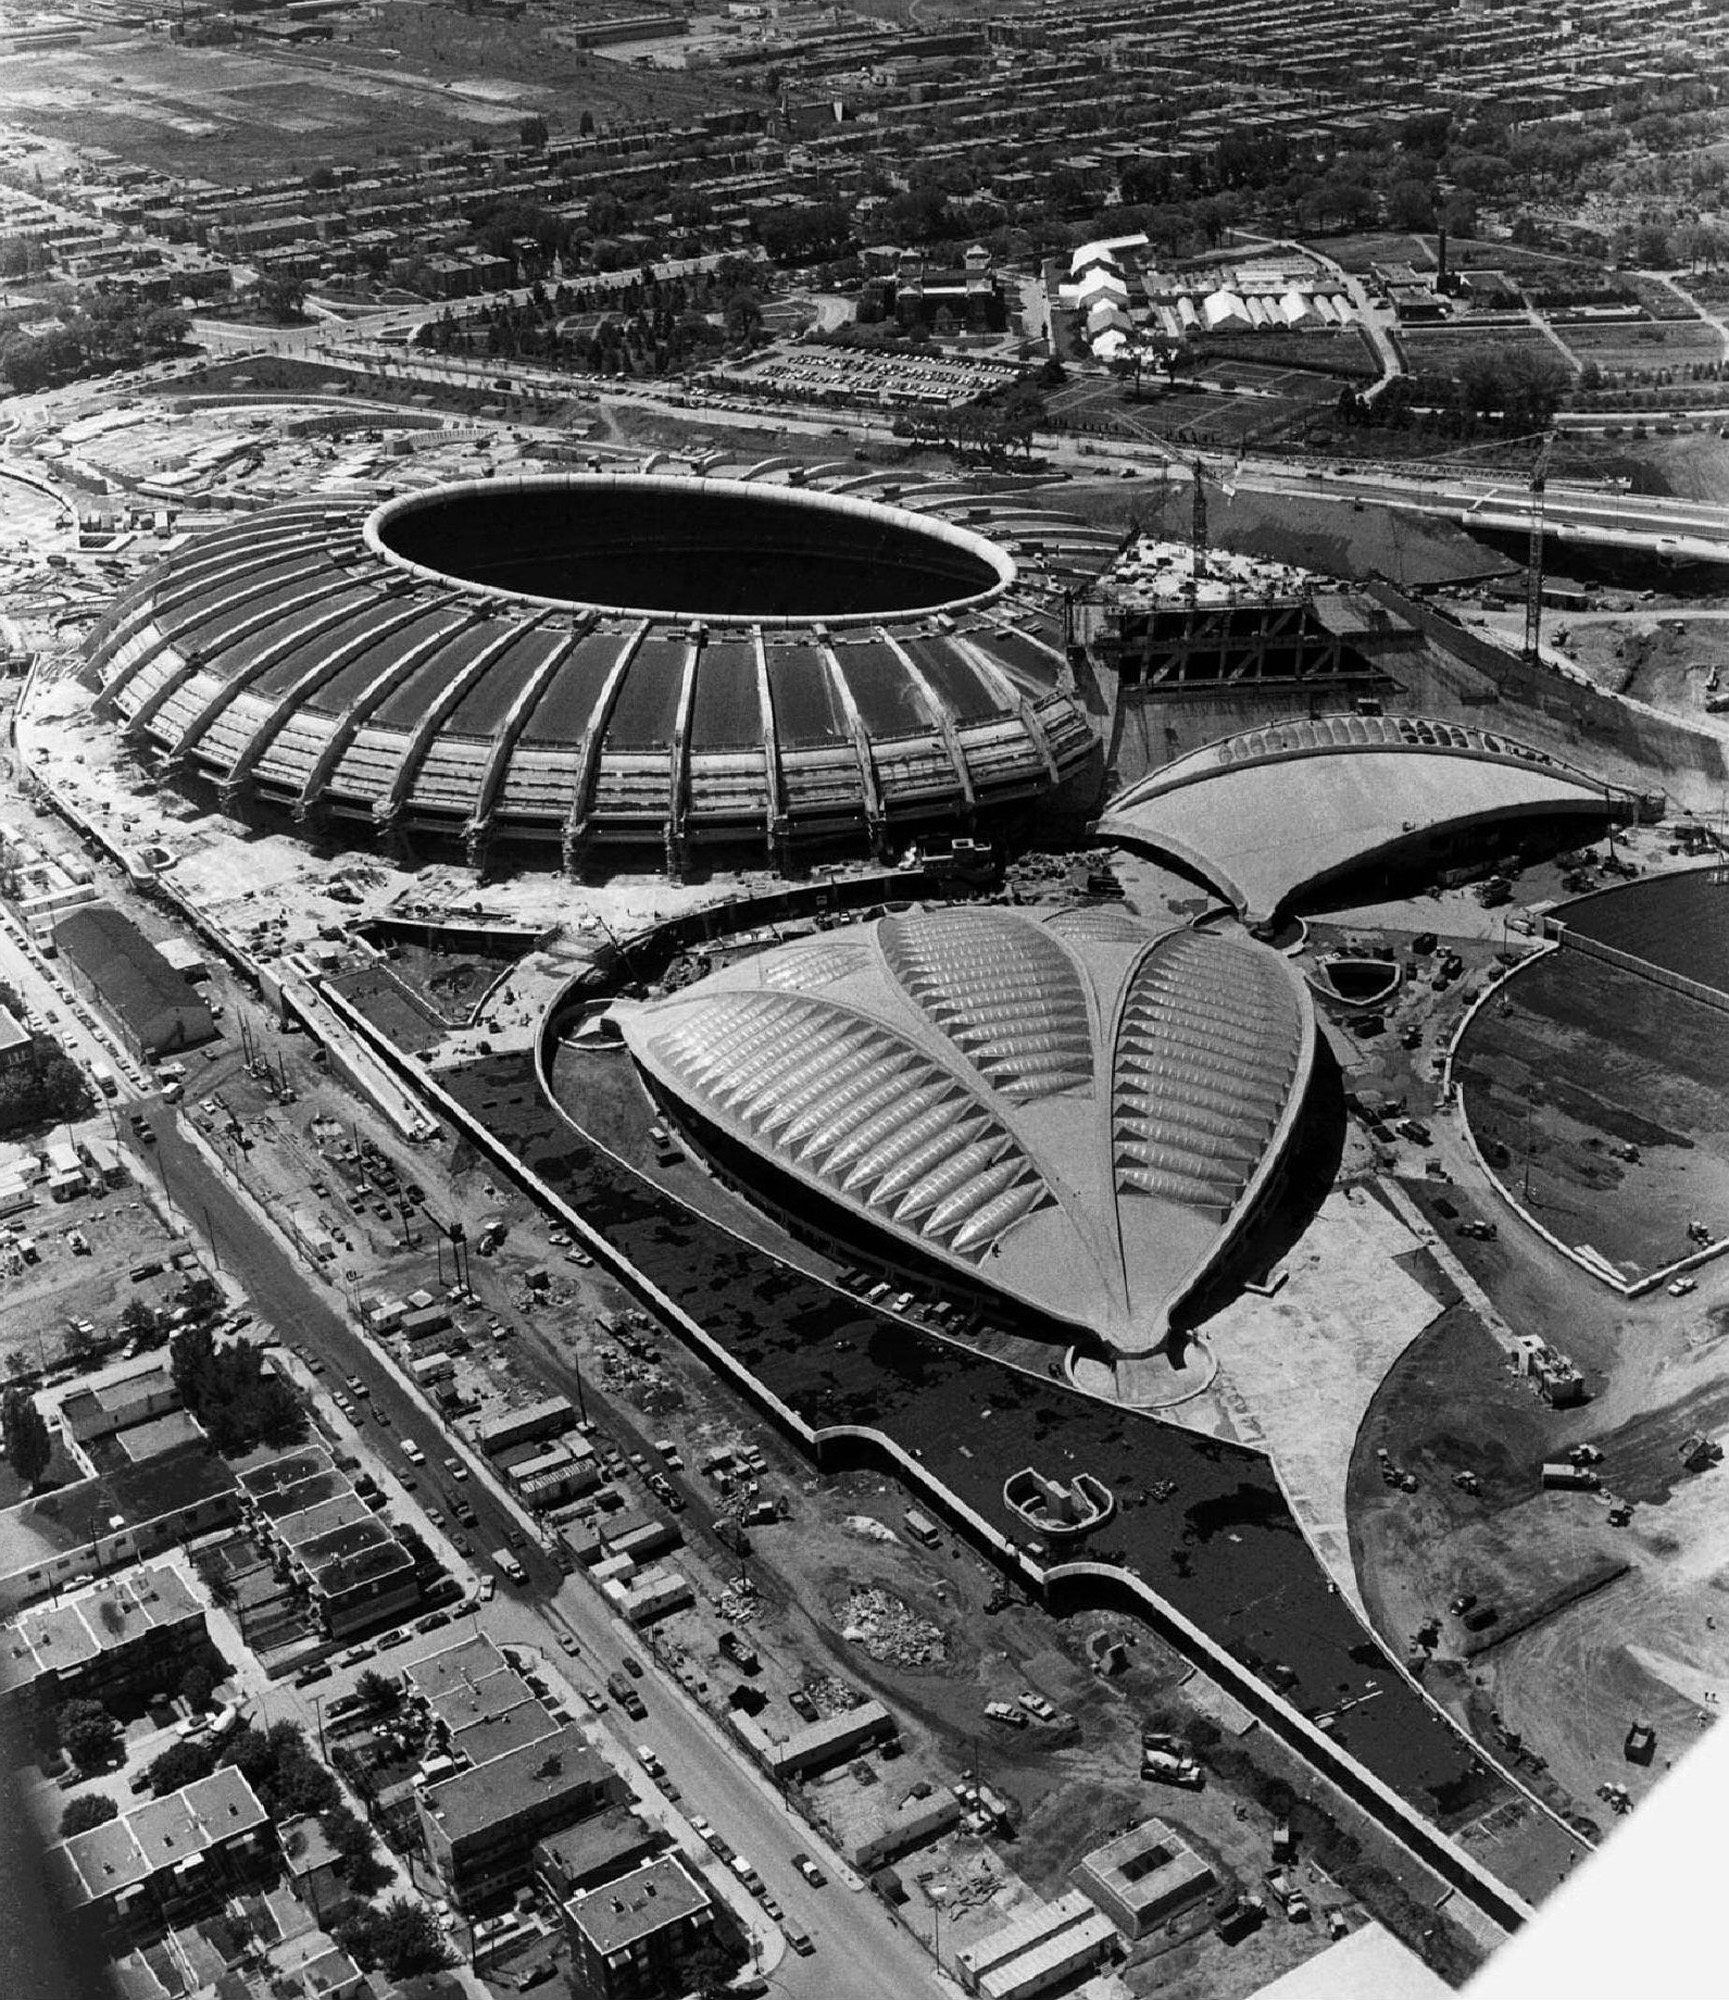 FILE - The Montreal Olympic Stadium and the Olympic Veledrome are shown in this June 1976 photo. It was 30 years ago that the 21st Olympic Games in Montreal opened. They were a huge success despite shocking cost over-runs and construction delays and the fact that there was no gold among the host countrys 11 medals. (CP PICTURE ARCHIVE/stf)